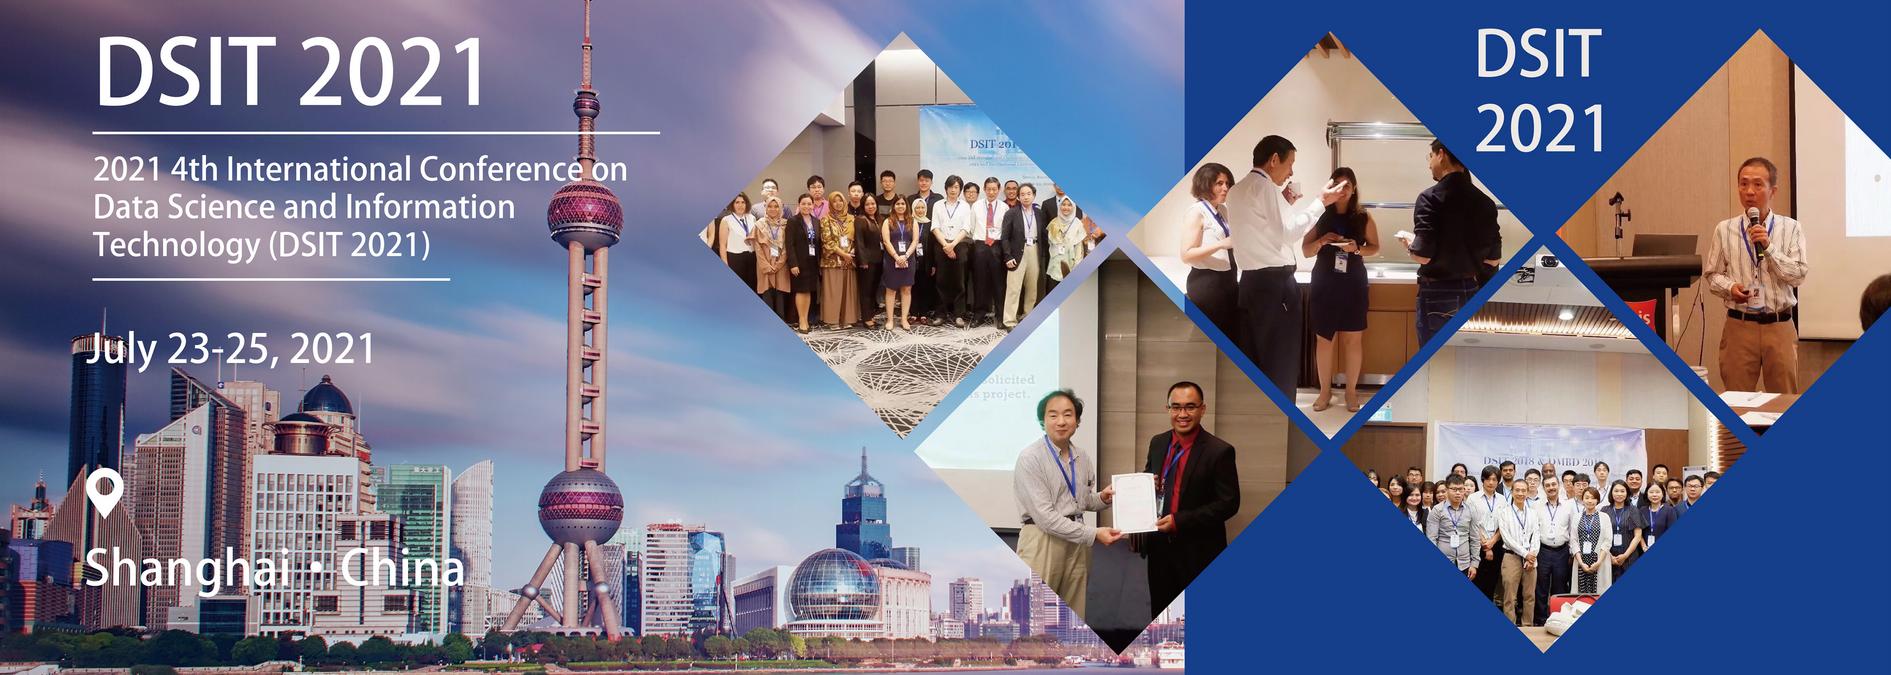 2021 4th International Conference on Data Science and Information Technology (DSIT 2021), Shanghai, China